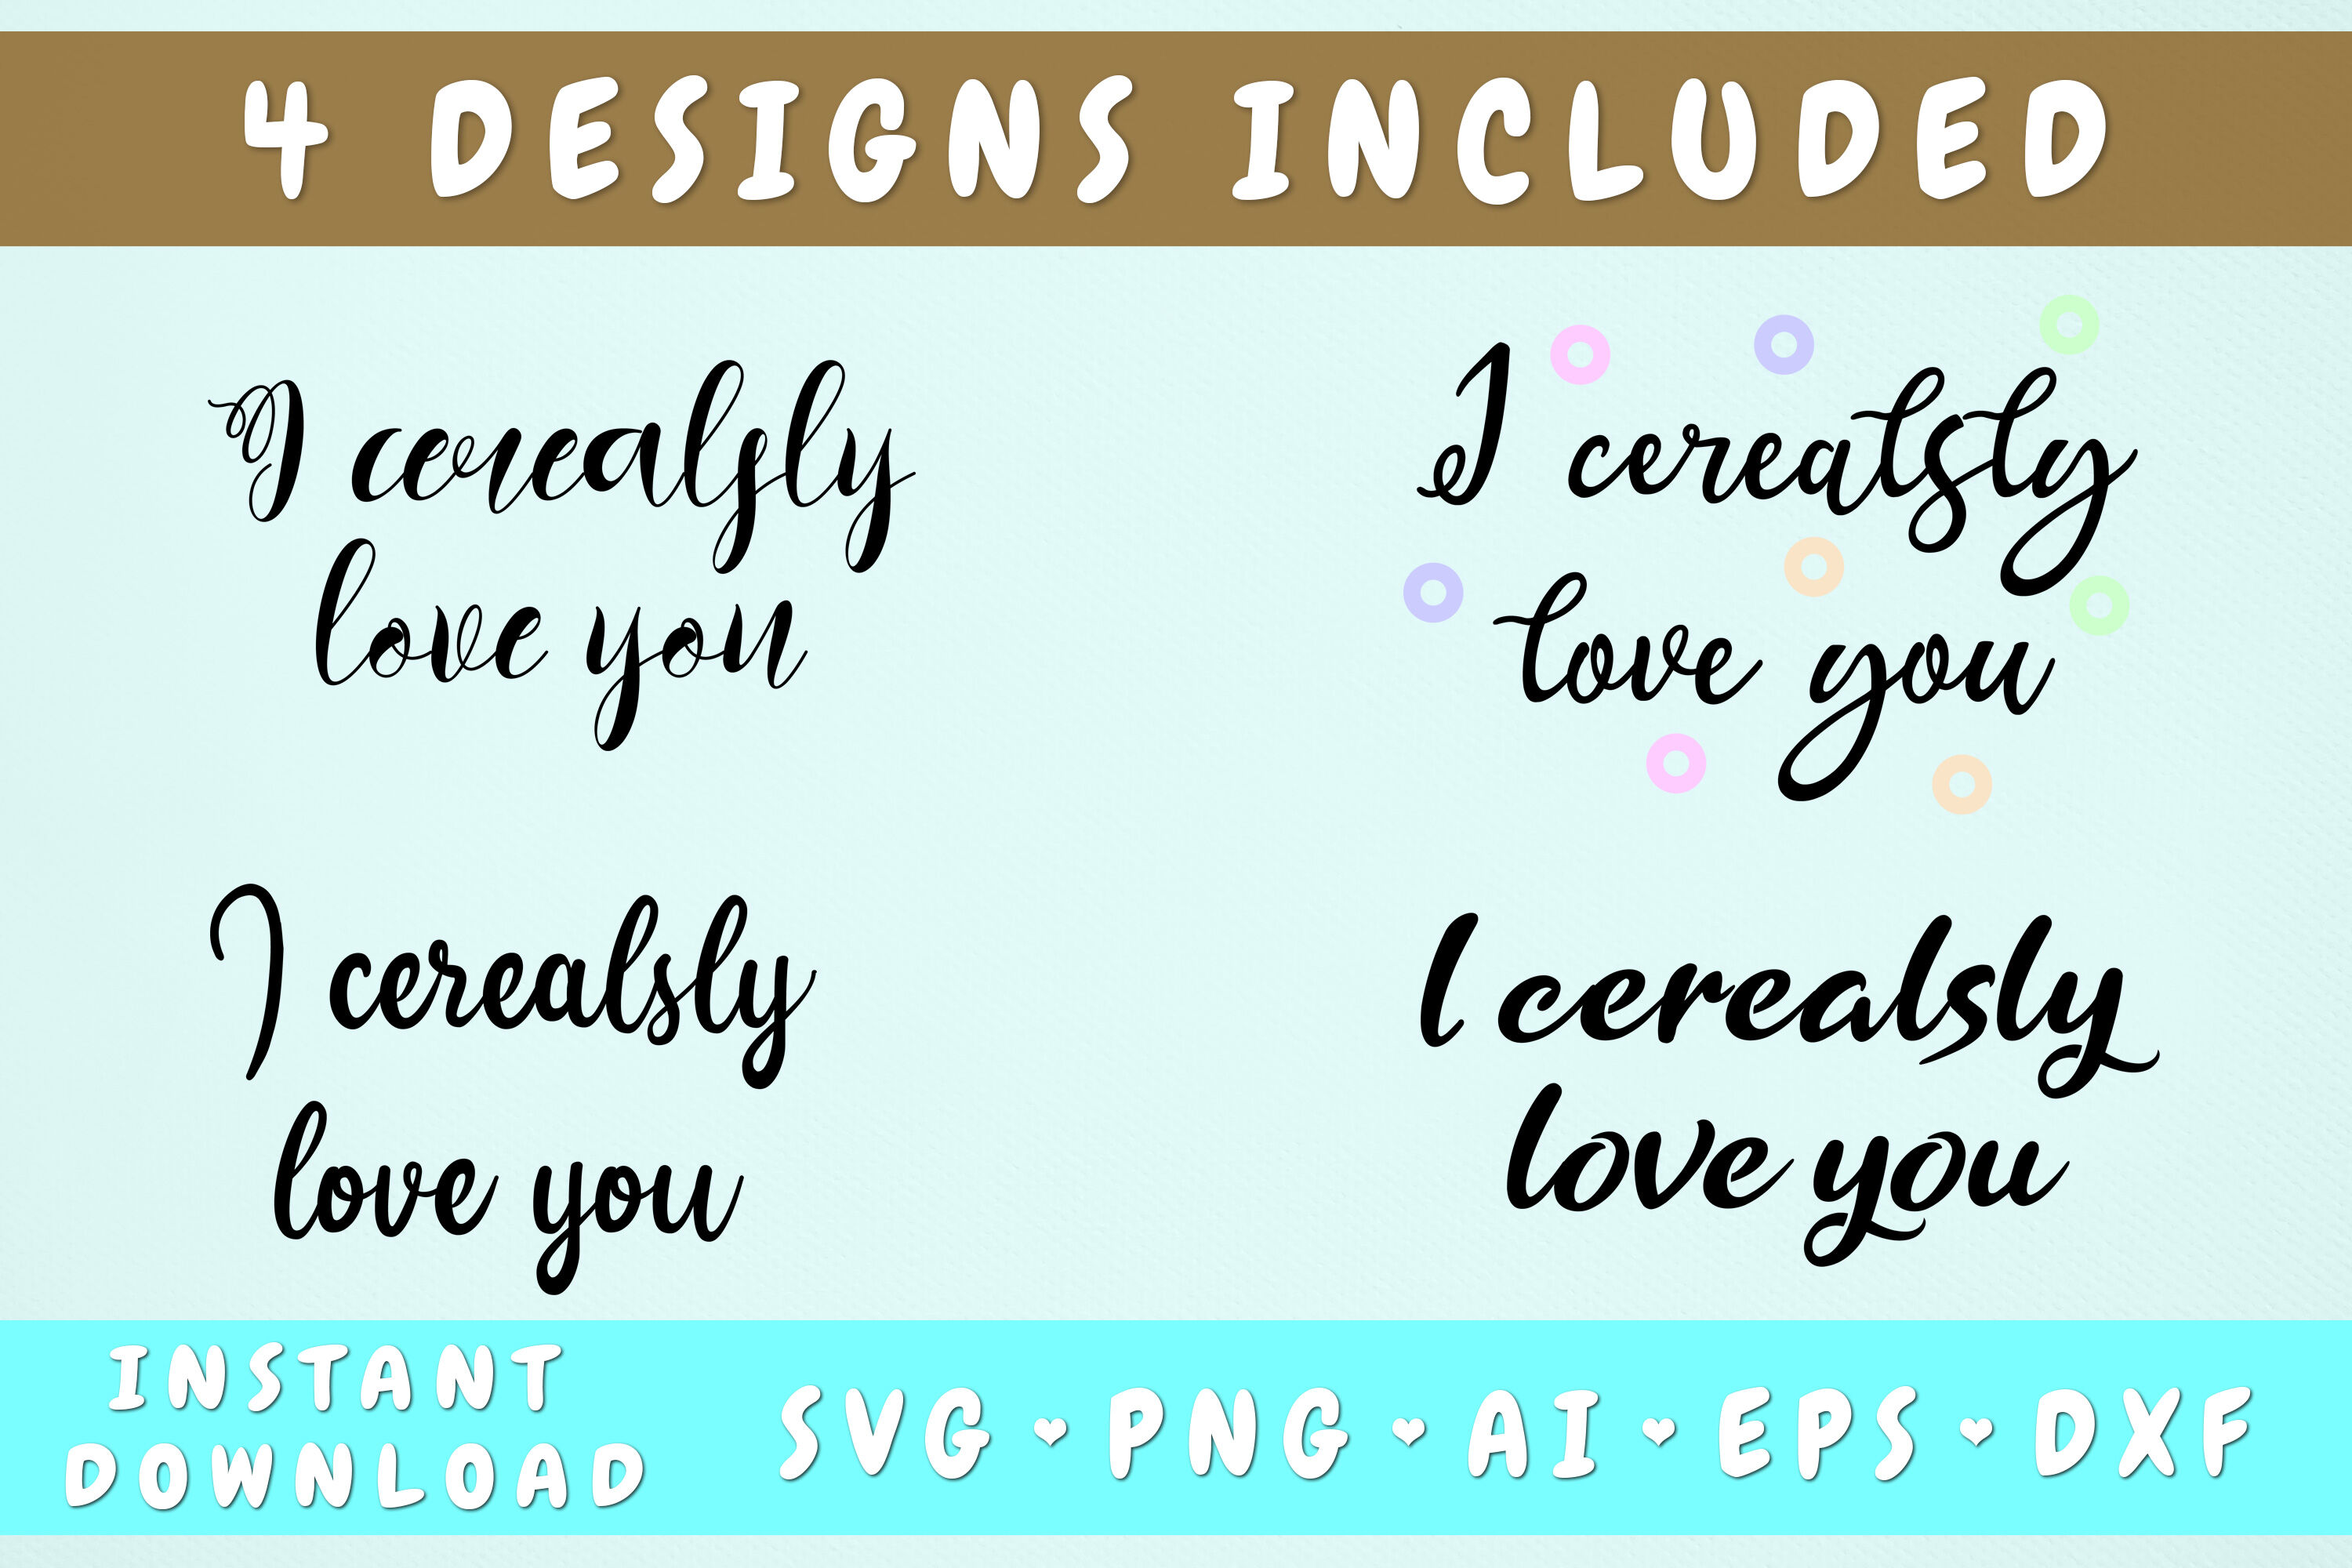 I Cerealsly Love You SVG - 4 Designs By ...